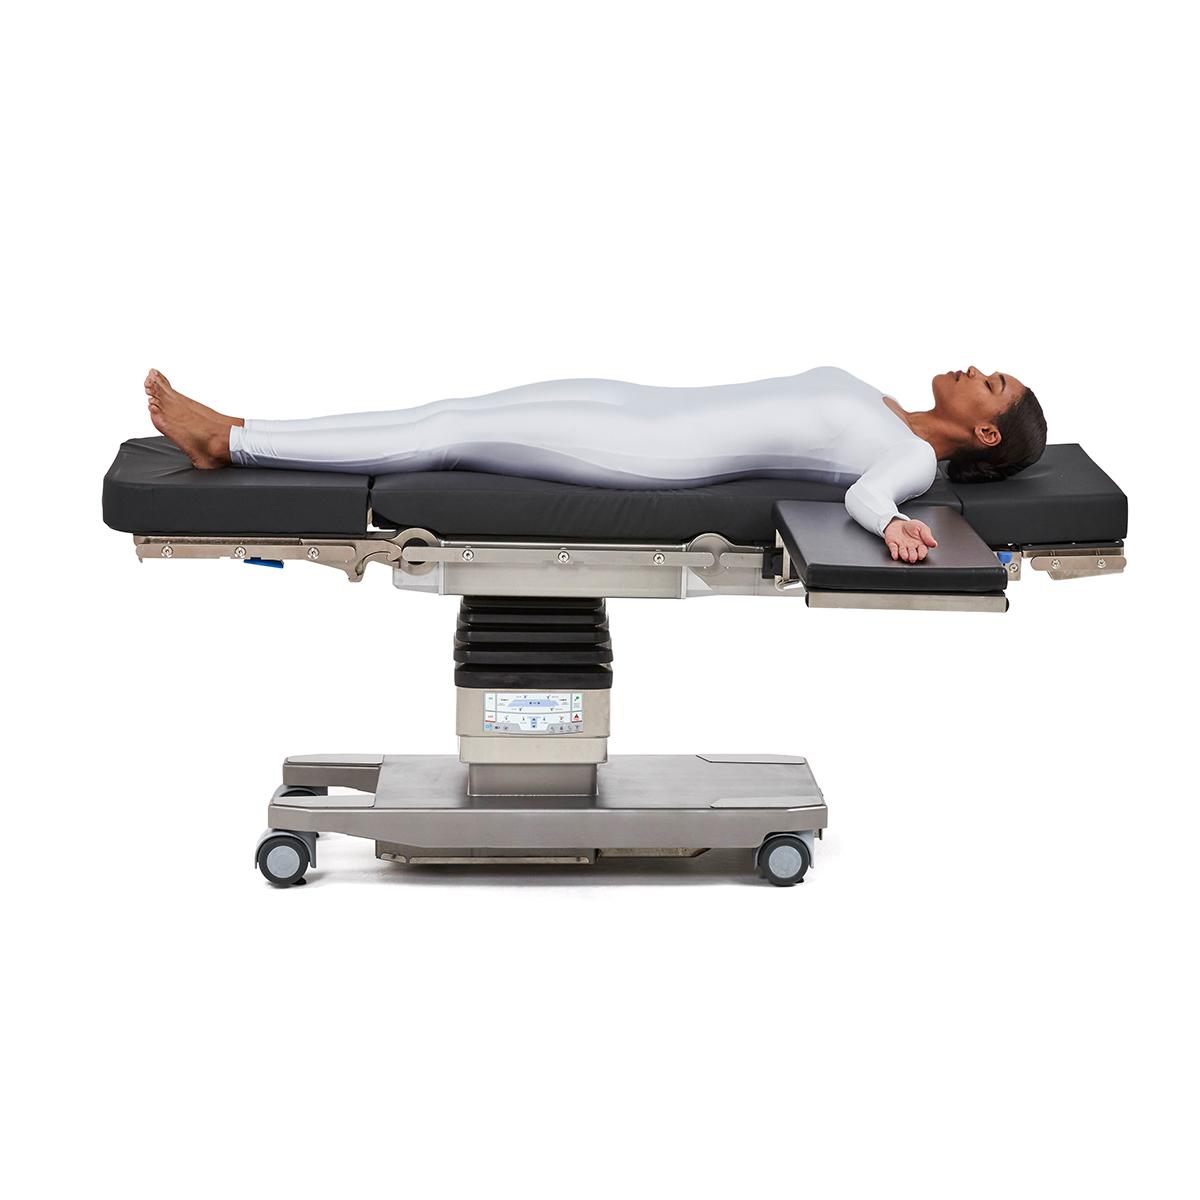 Patient positioned on Hillrom surgical table equipped with Arm and Hand OR accessories.